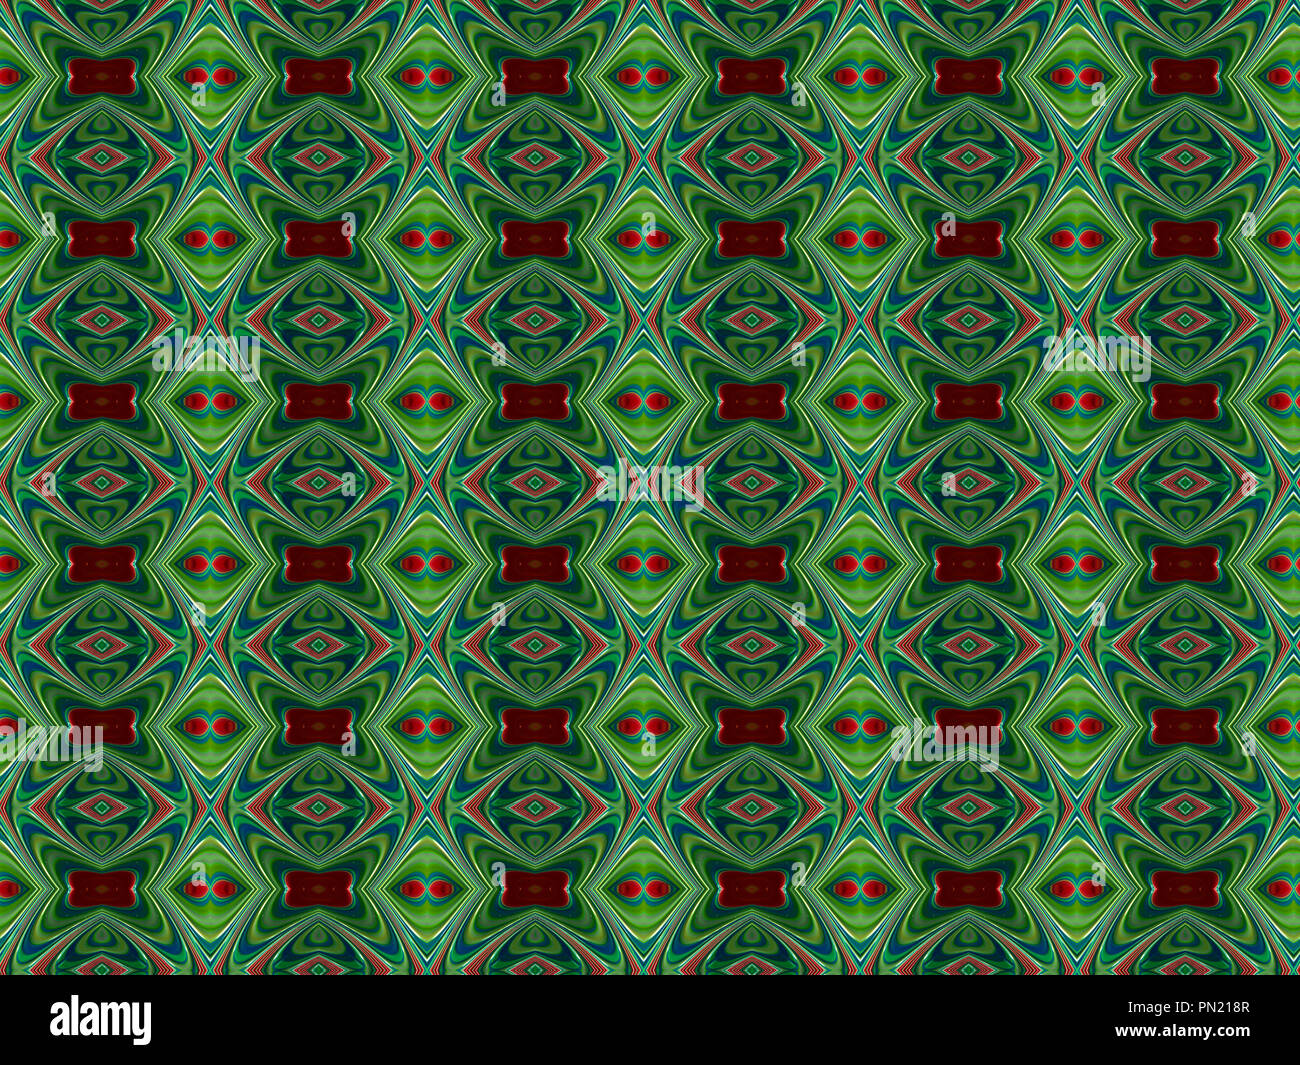 Green and black background pattern illustration Stock Photo